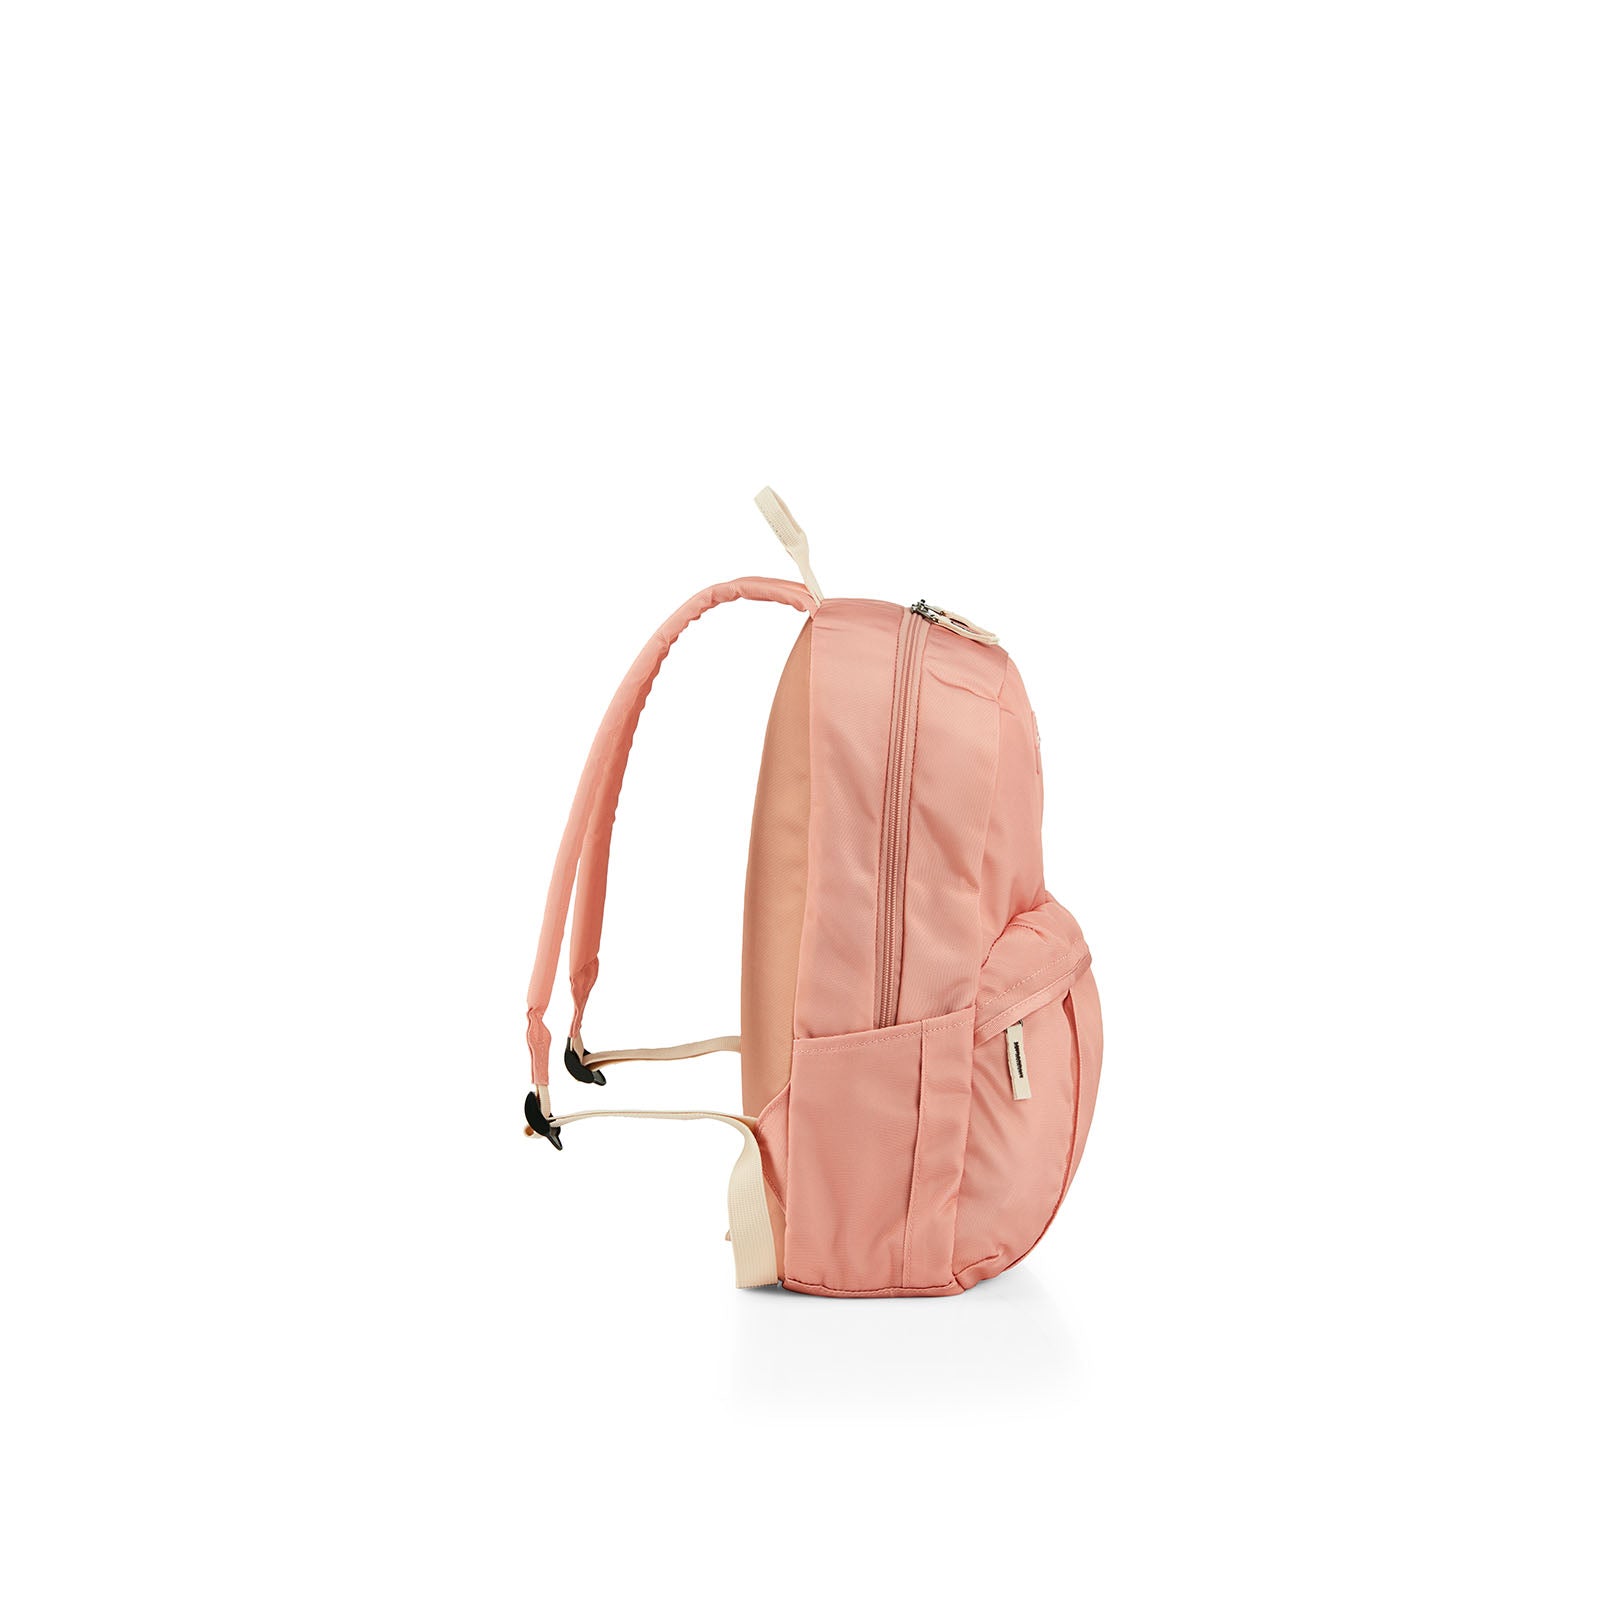 American-Tourister-Rudy-Everyday-Backpack-Apricot-Ice-Side-Pocket